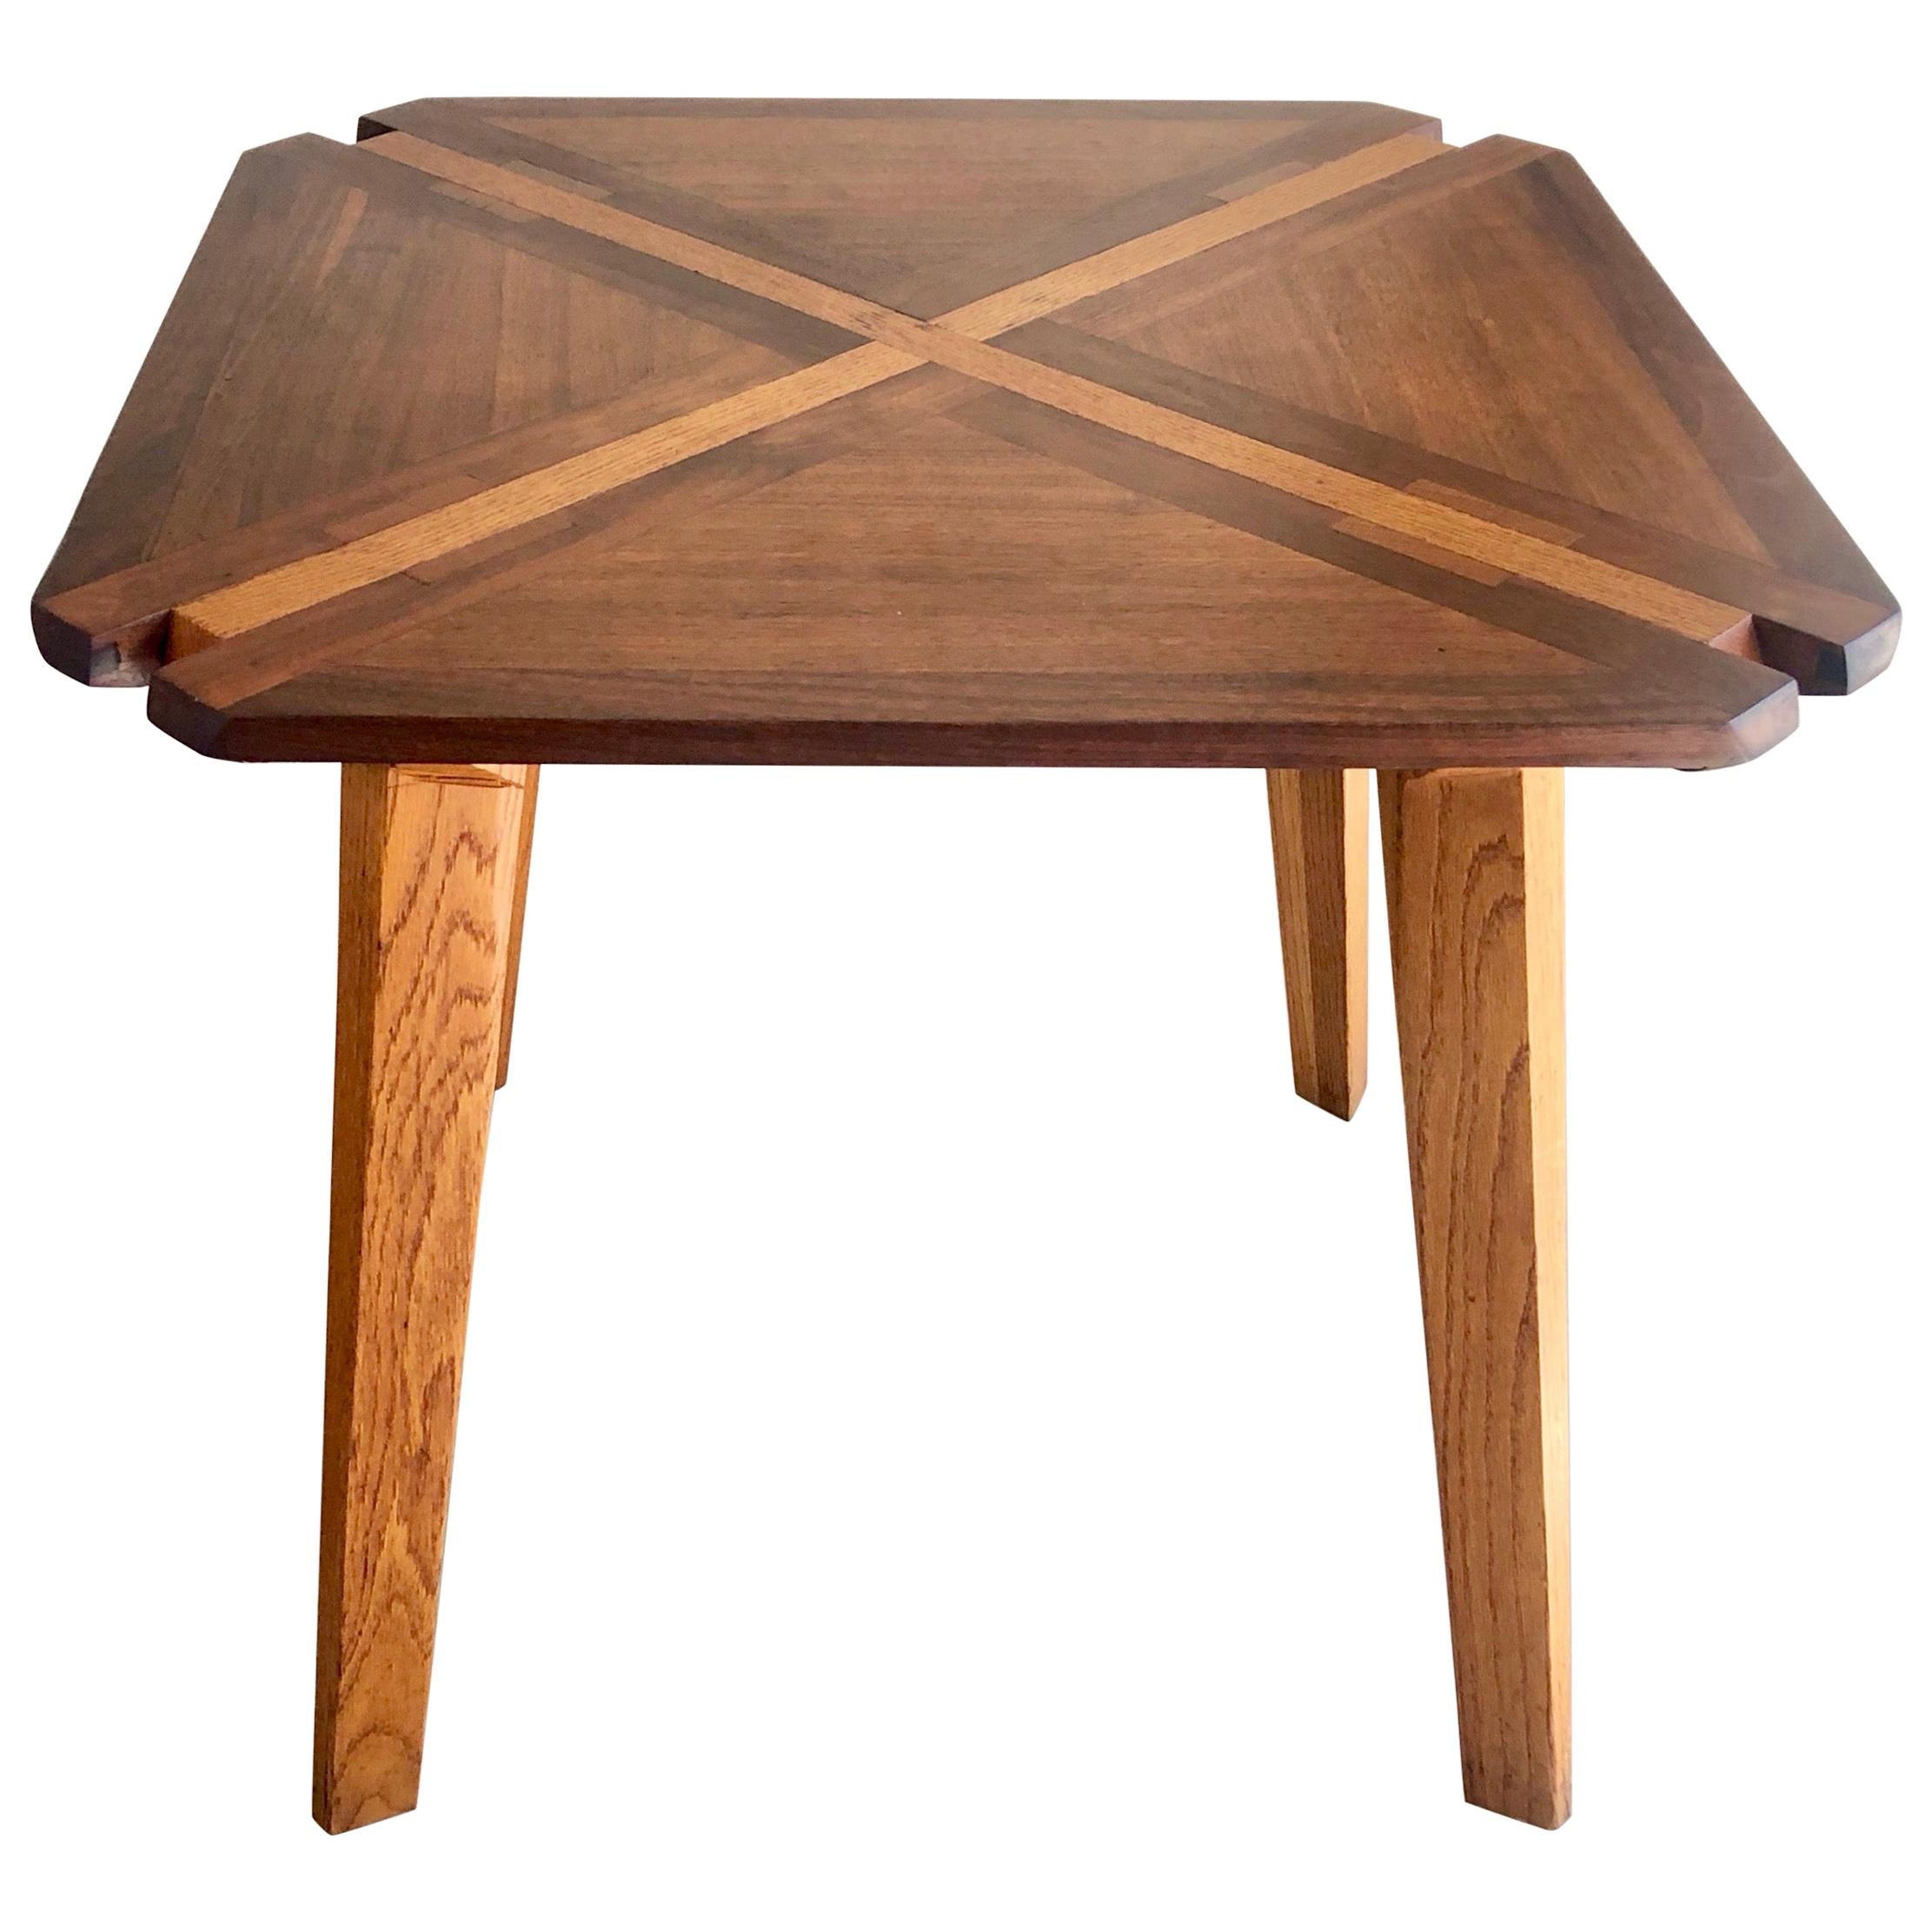 Studio Crafted Mixed Woods Dining Table / Game Table